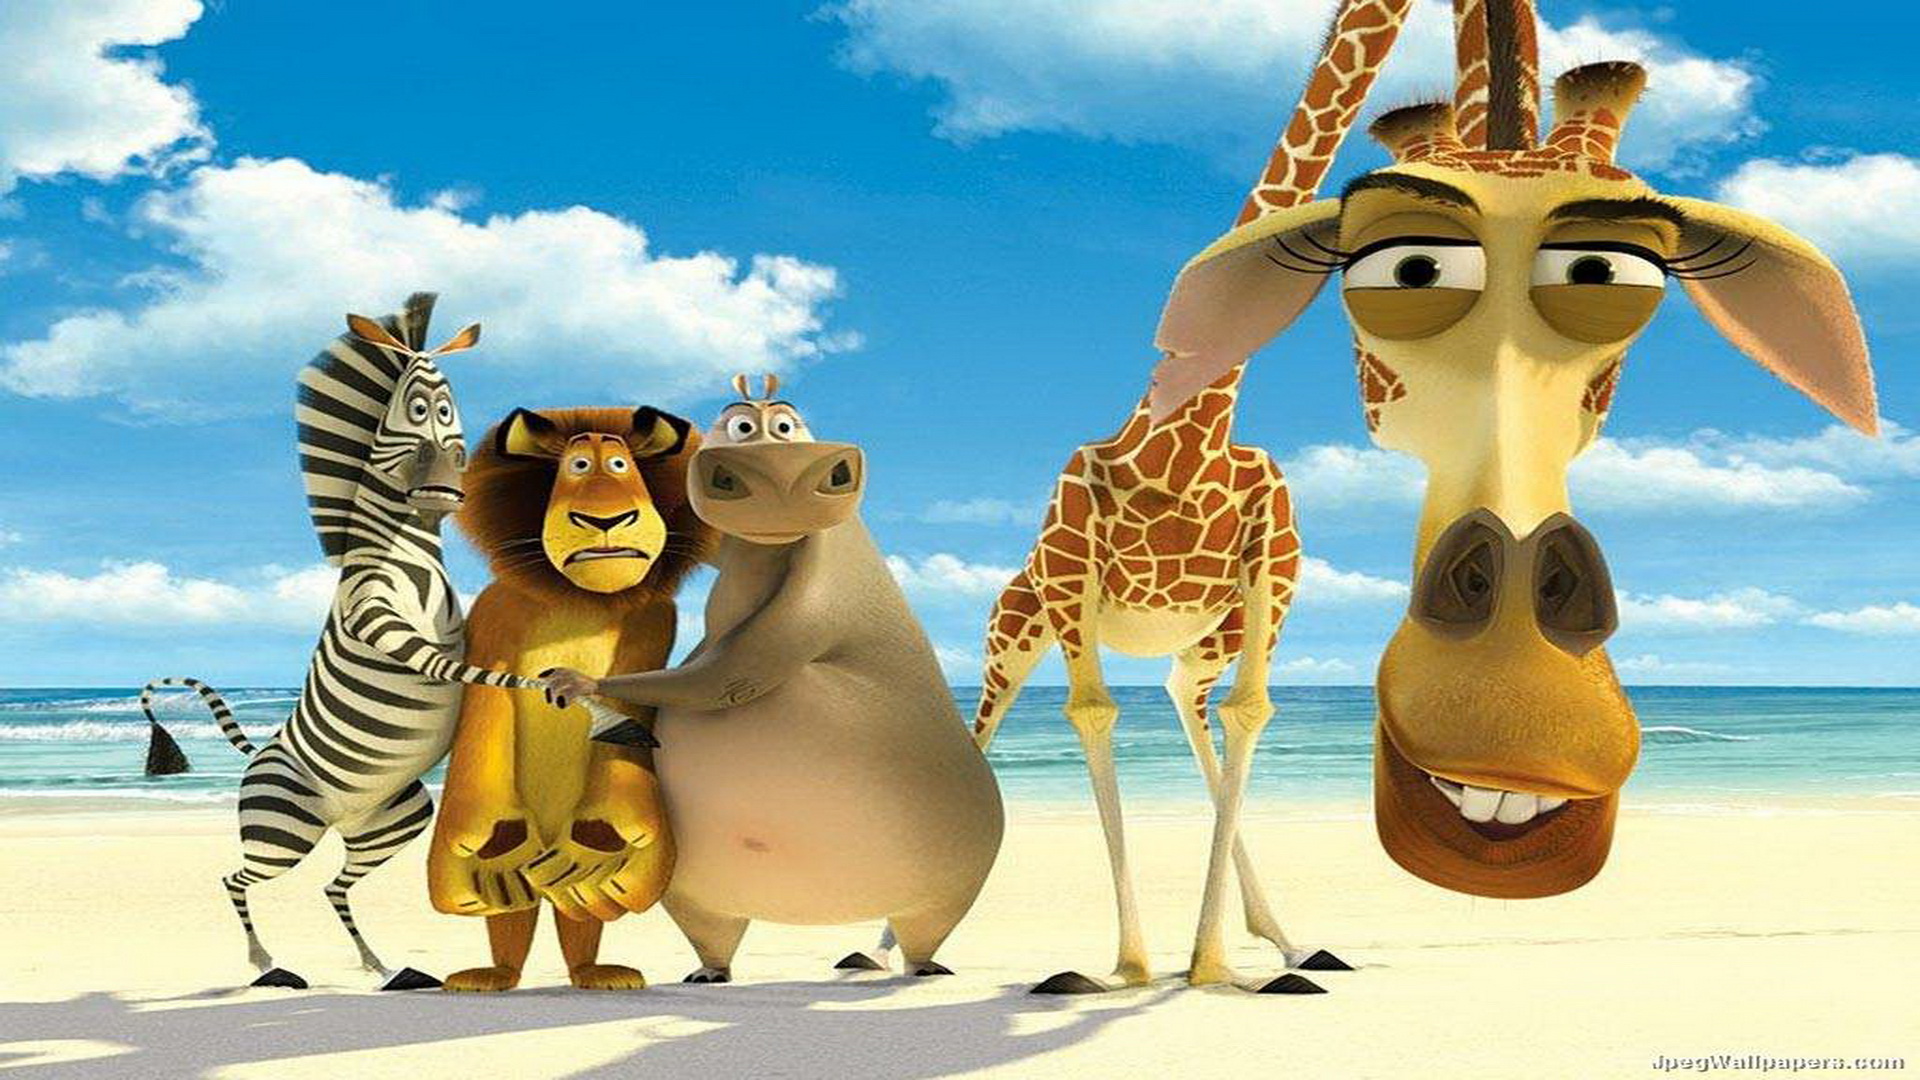 Find more 3D Wallpapers Backgrounds madagascar high Wallpapersjpg 1920 x 10...